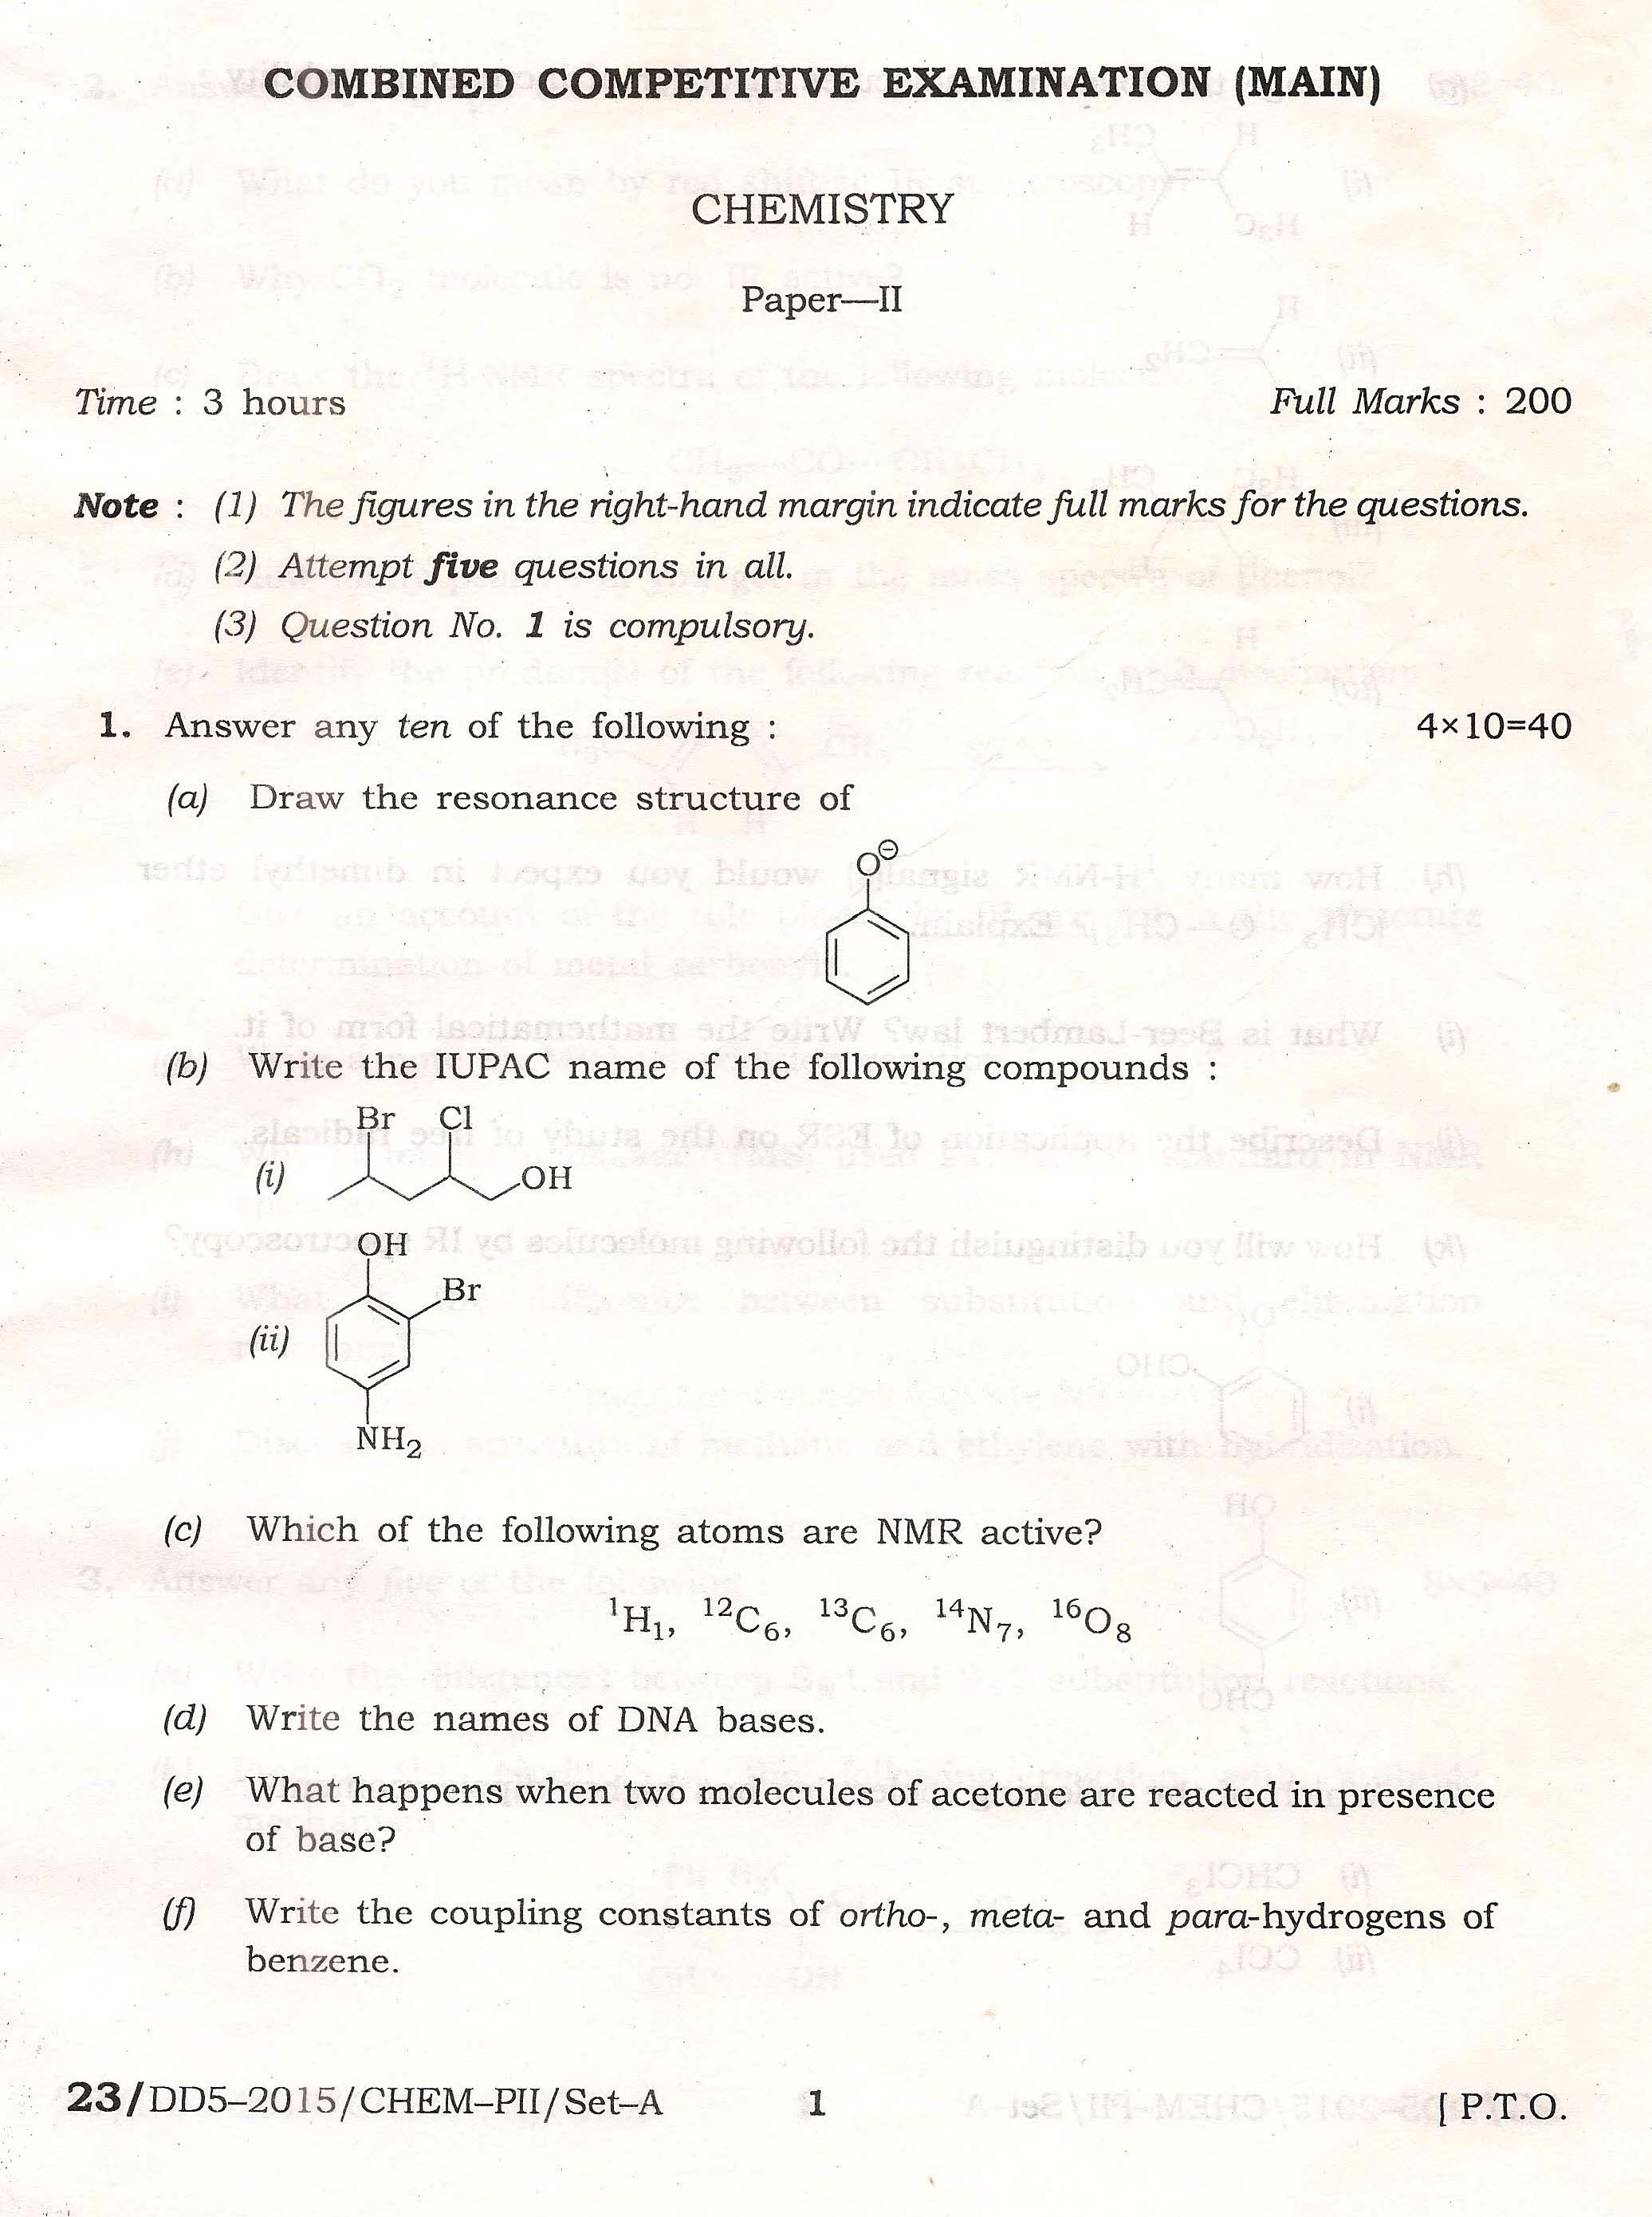 APPSC Combined Competitive Main Exam 2015 Chemistry Paper II 1